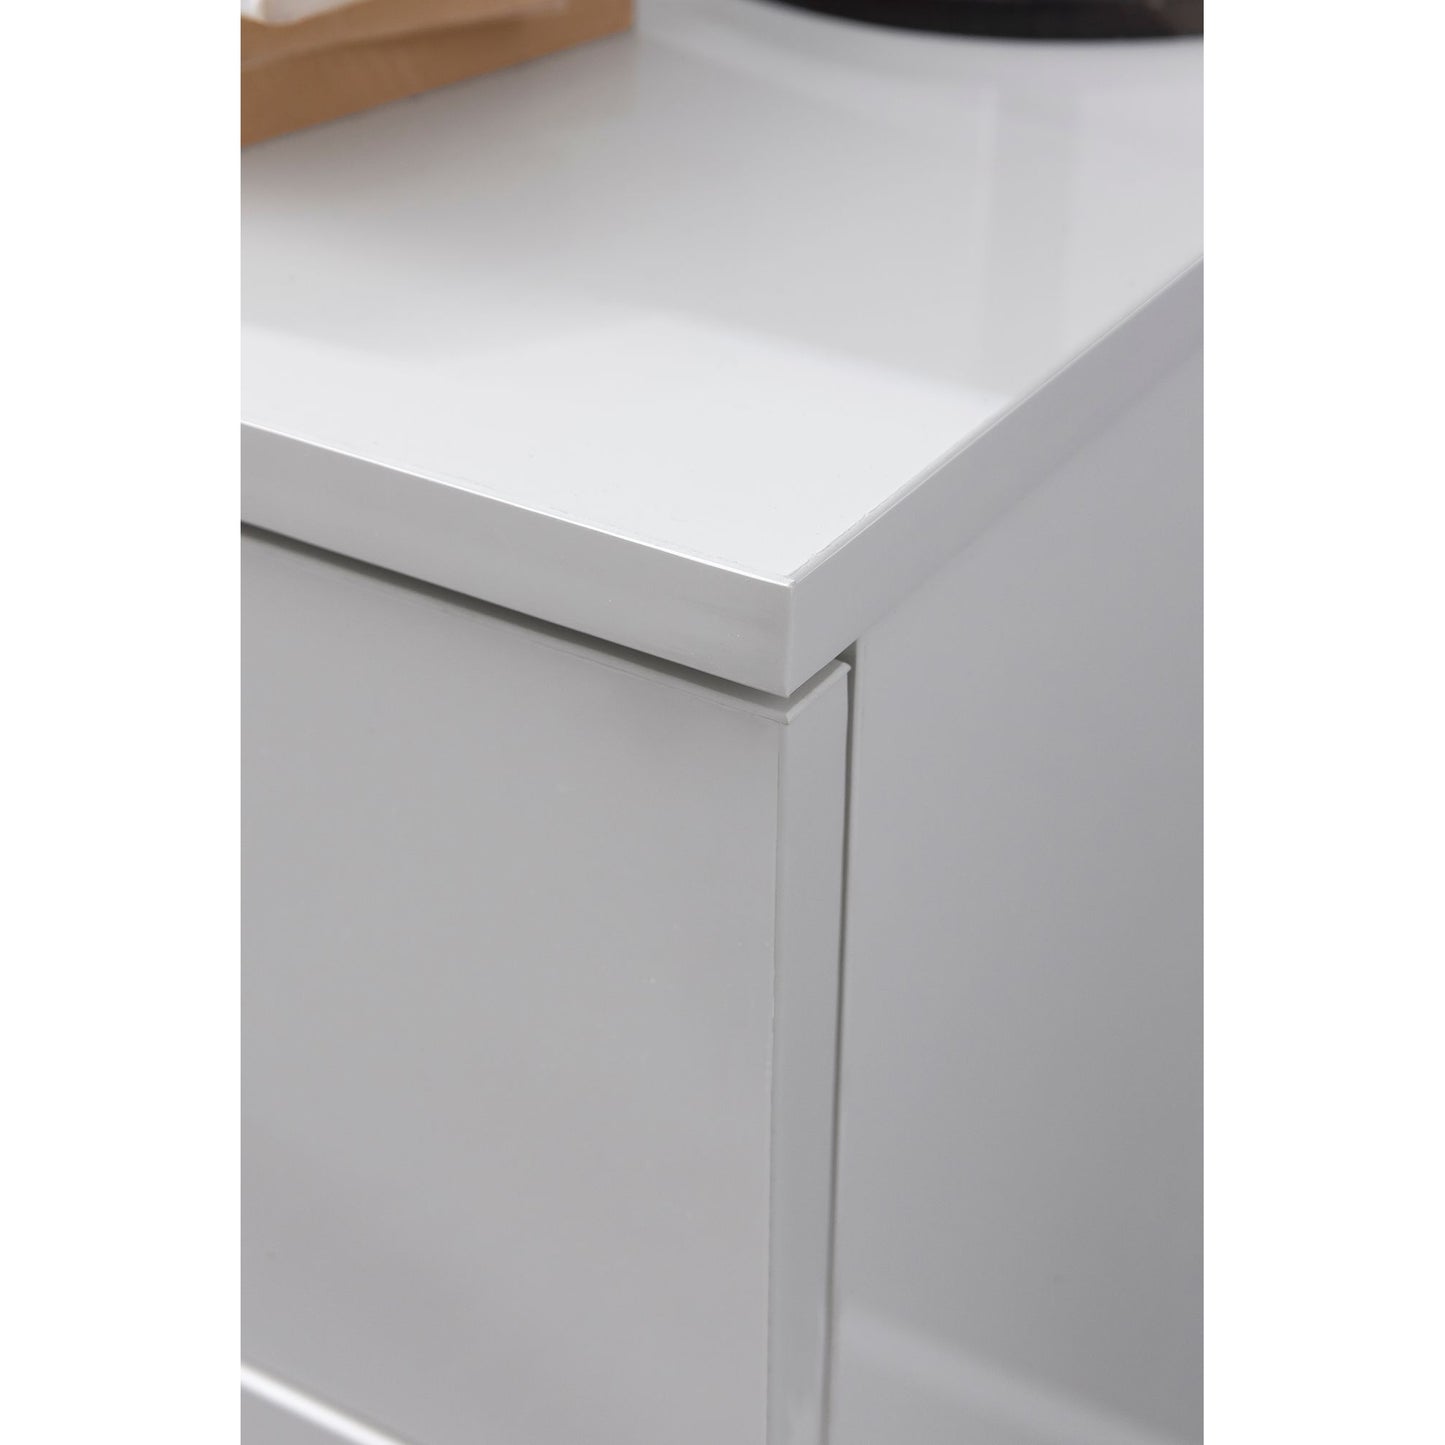 Nancy's Artondale Bedside Table - Chest of Drawers - 3 Drawers - Side Table - Storage Space - White - High Gloss - Engineered Wood - 45 x 34 x 53 cm